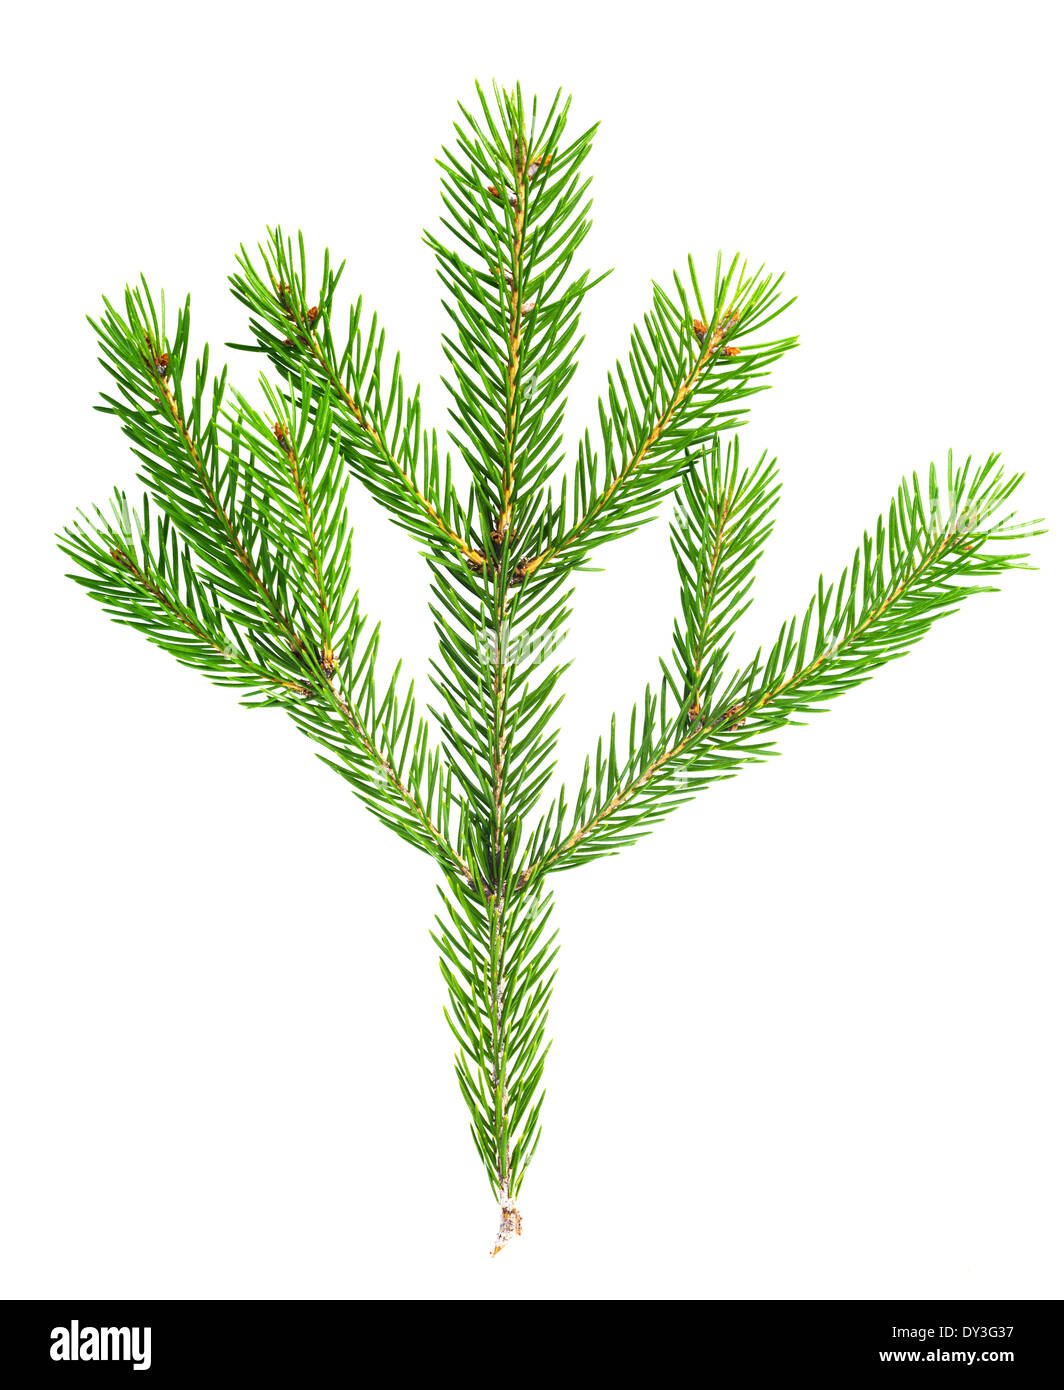 xmas green fir tree branch isolated on white background Stock Photo